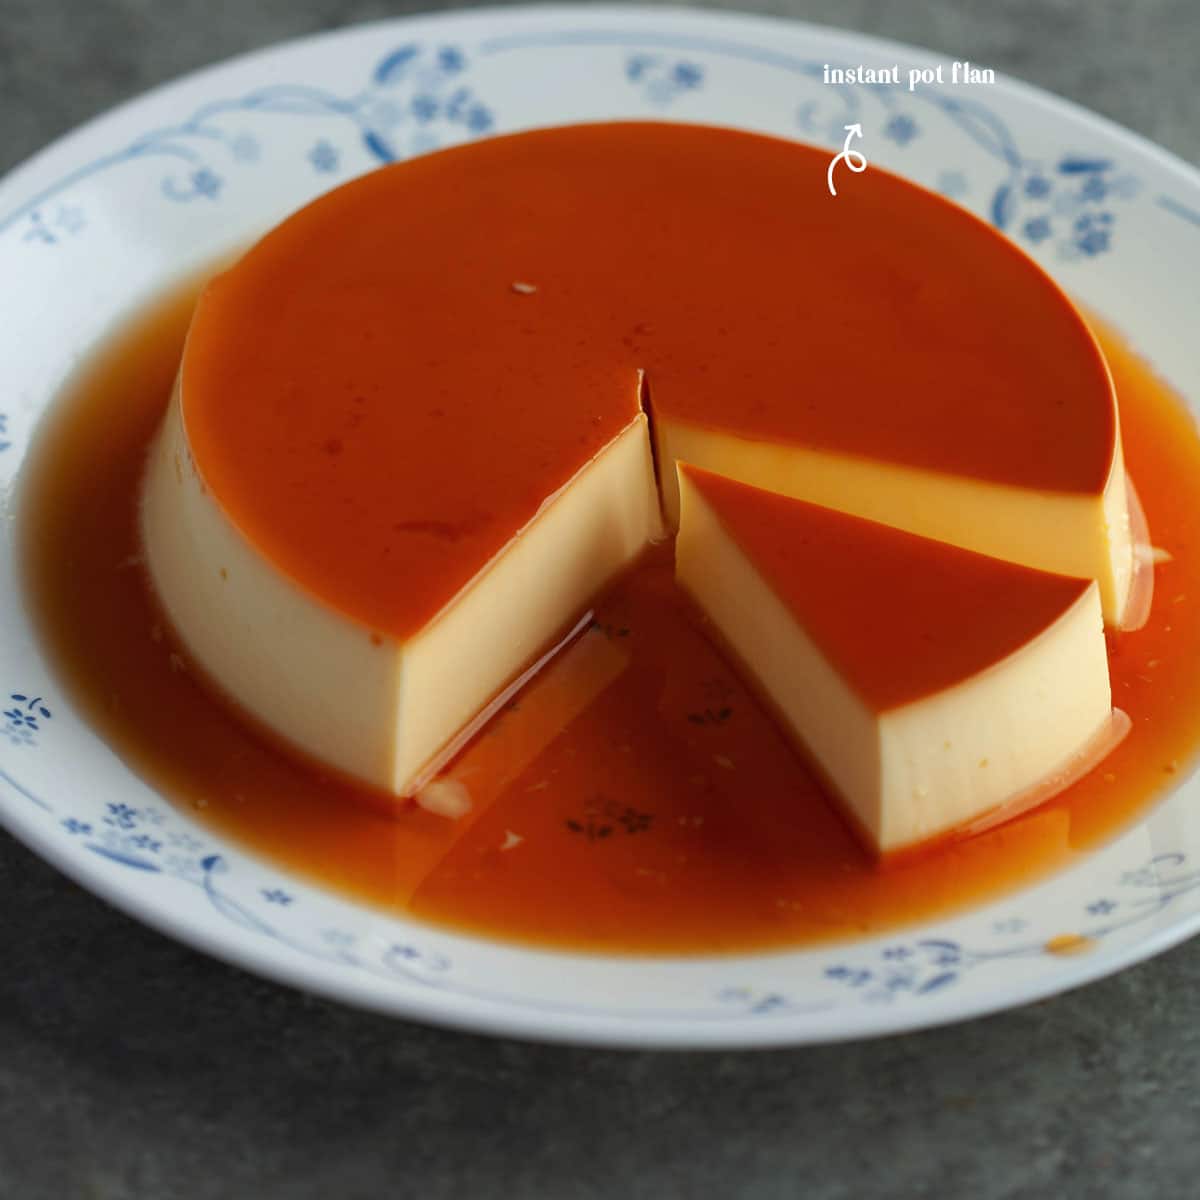 In comparison to flan cooked in an oven, flan cooked in an Instant Pot is as smooth as velvet, time after time. I couldn’t believe it.